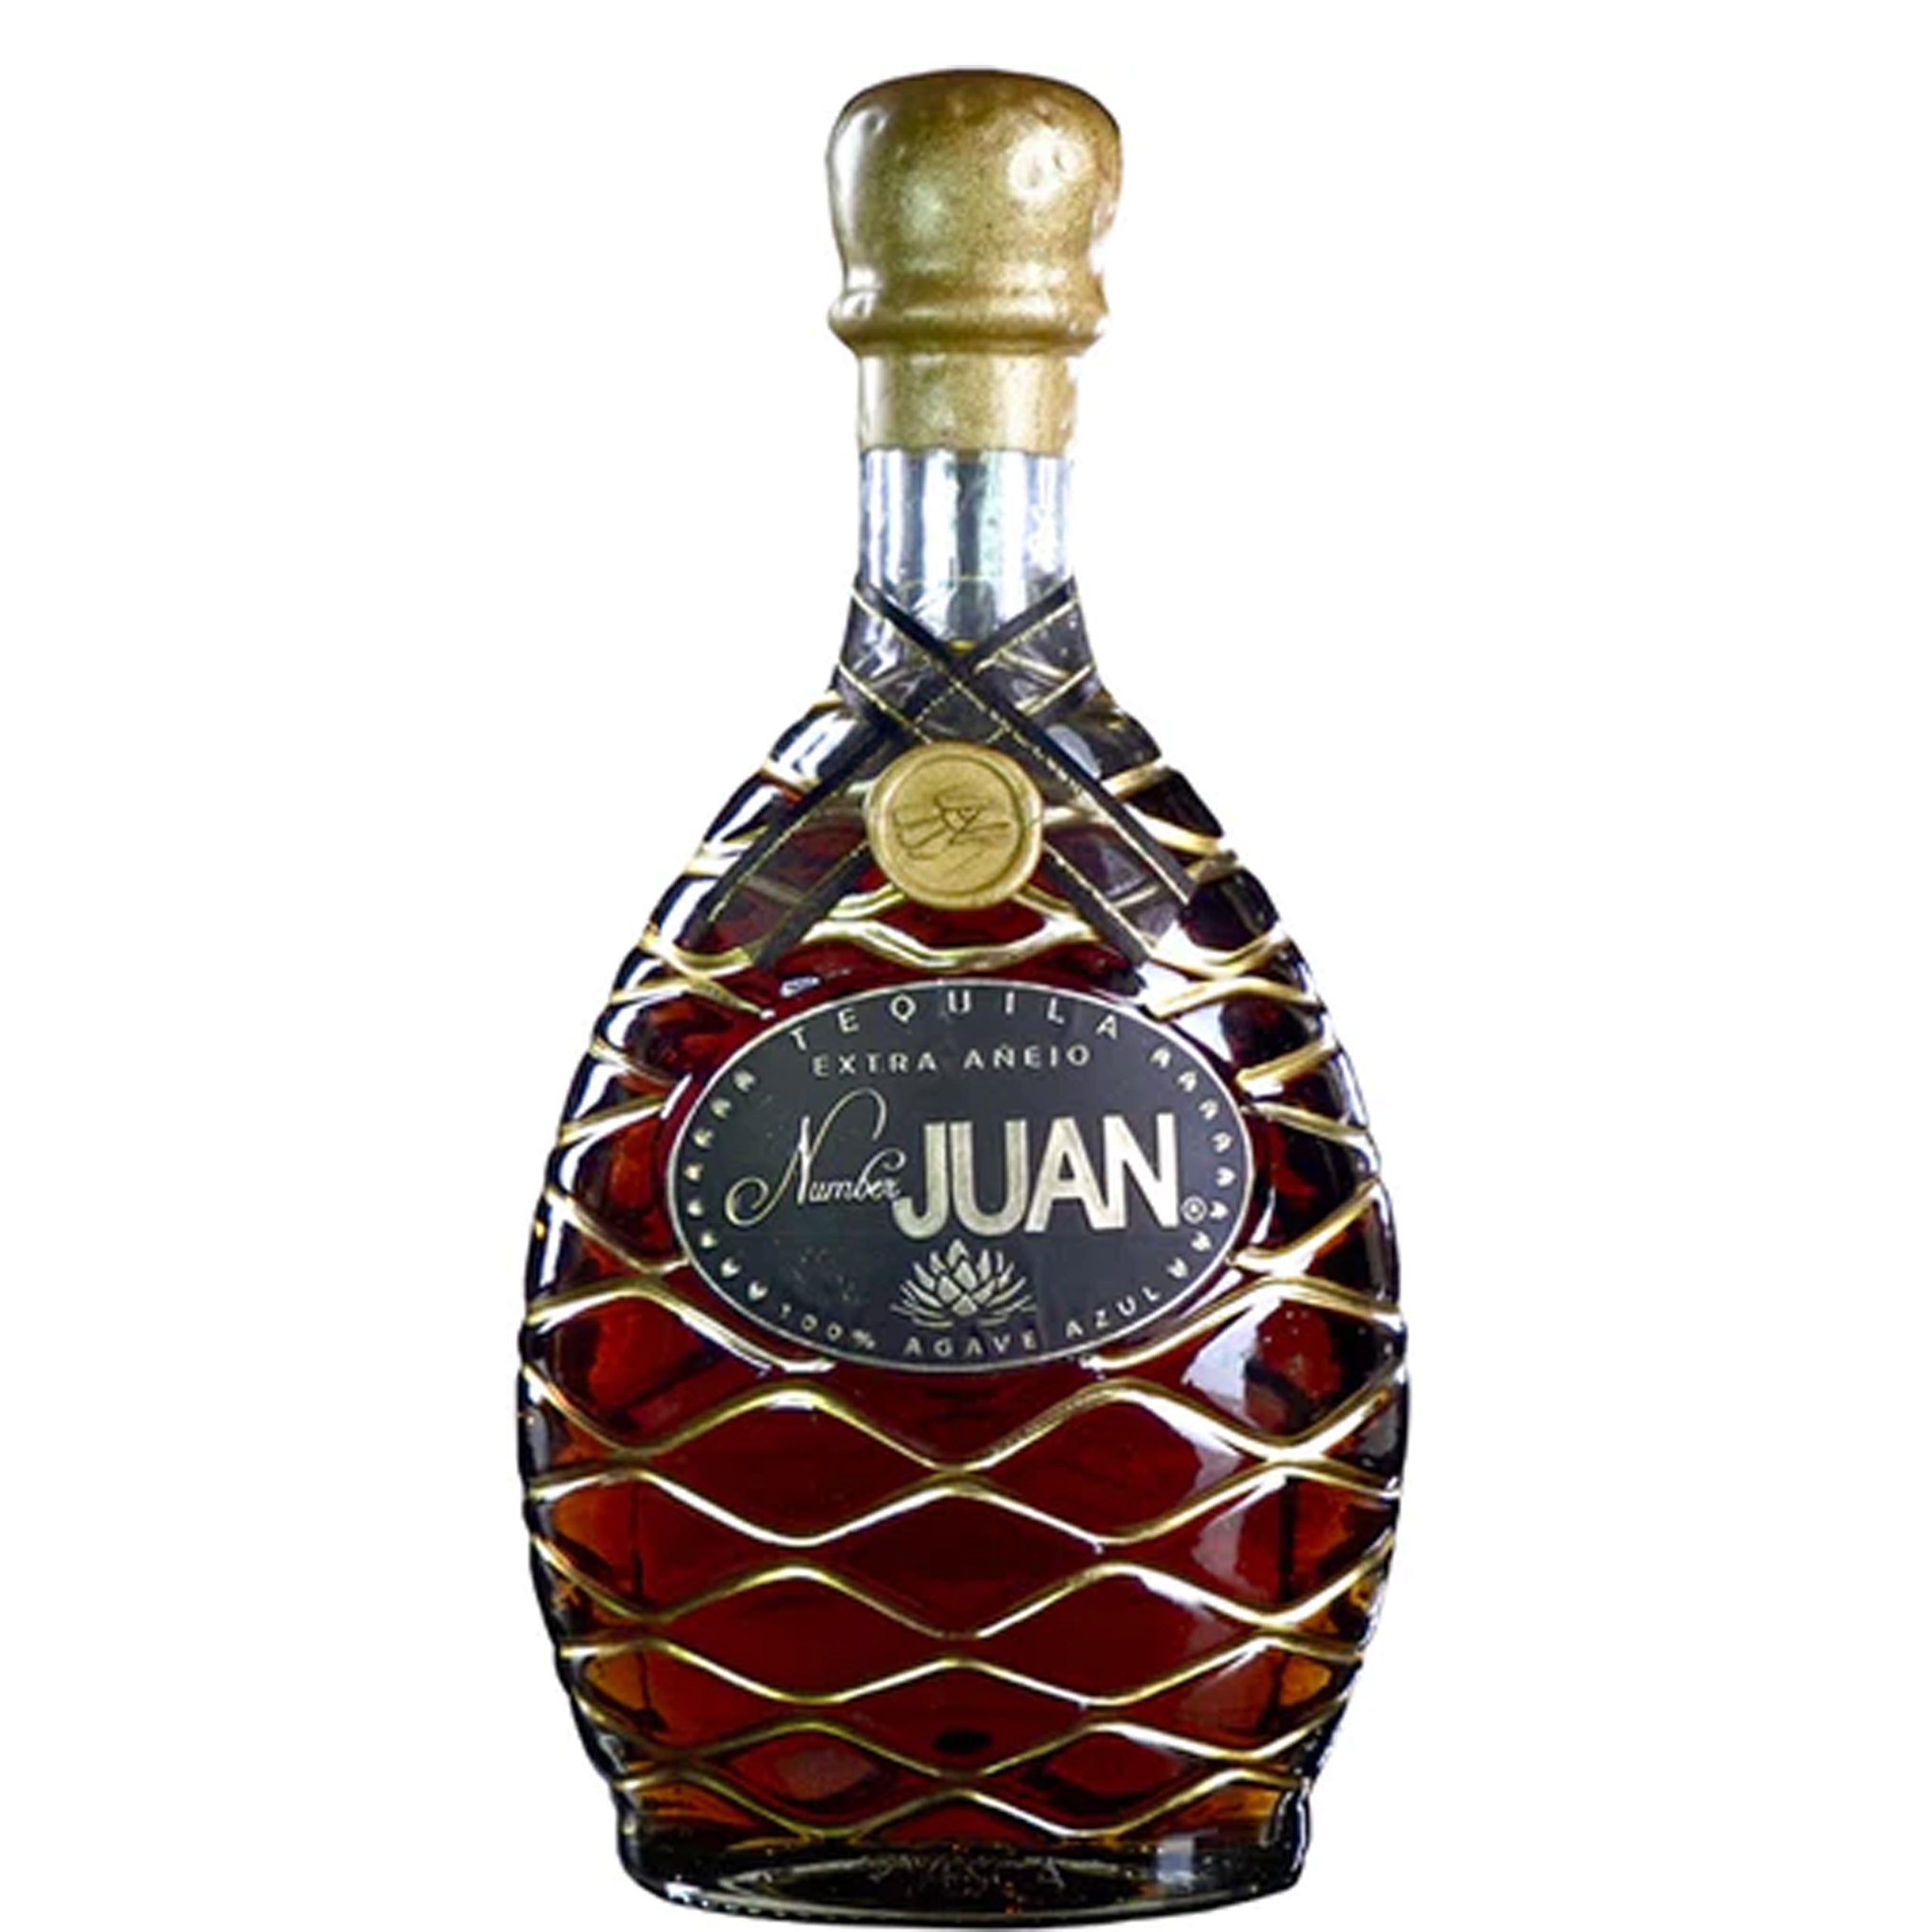 Number Juan Extra Anejo Tequila Limited Edition 'Juan in a Million'